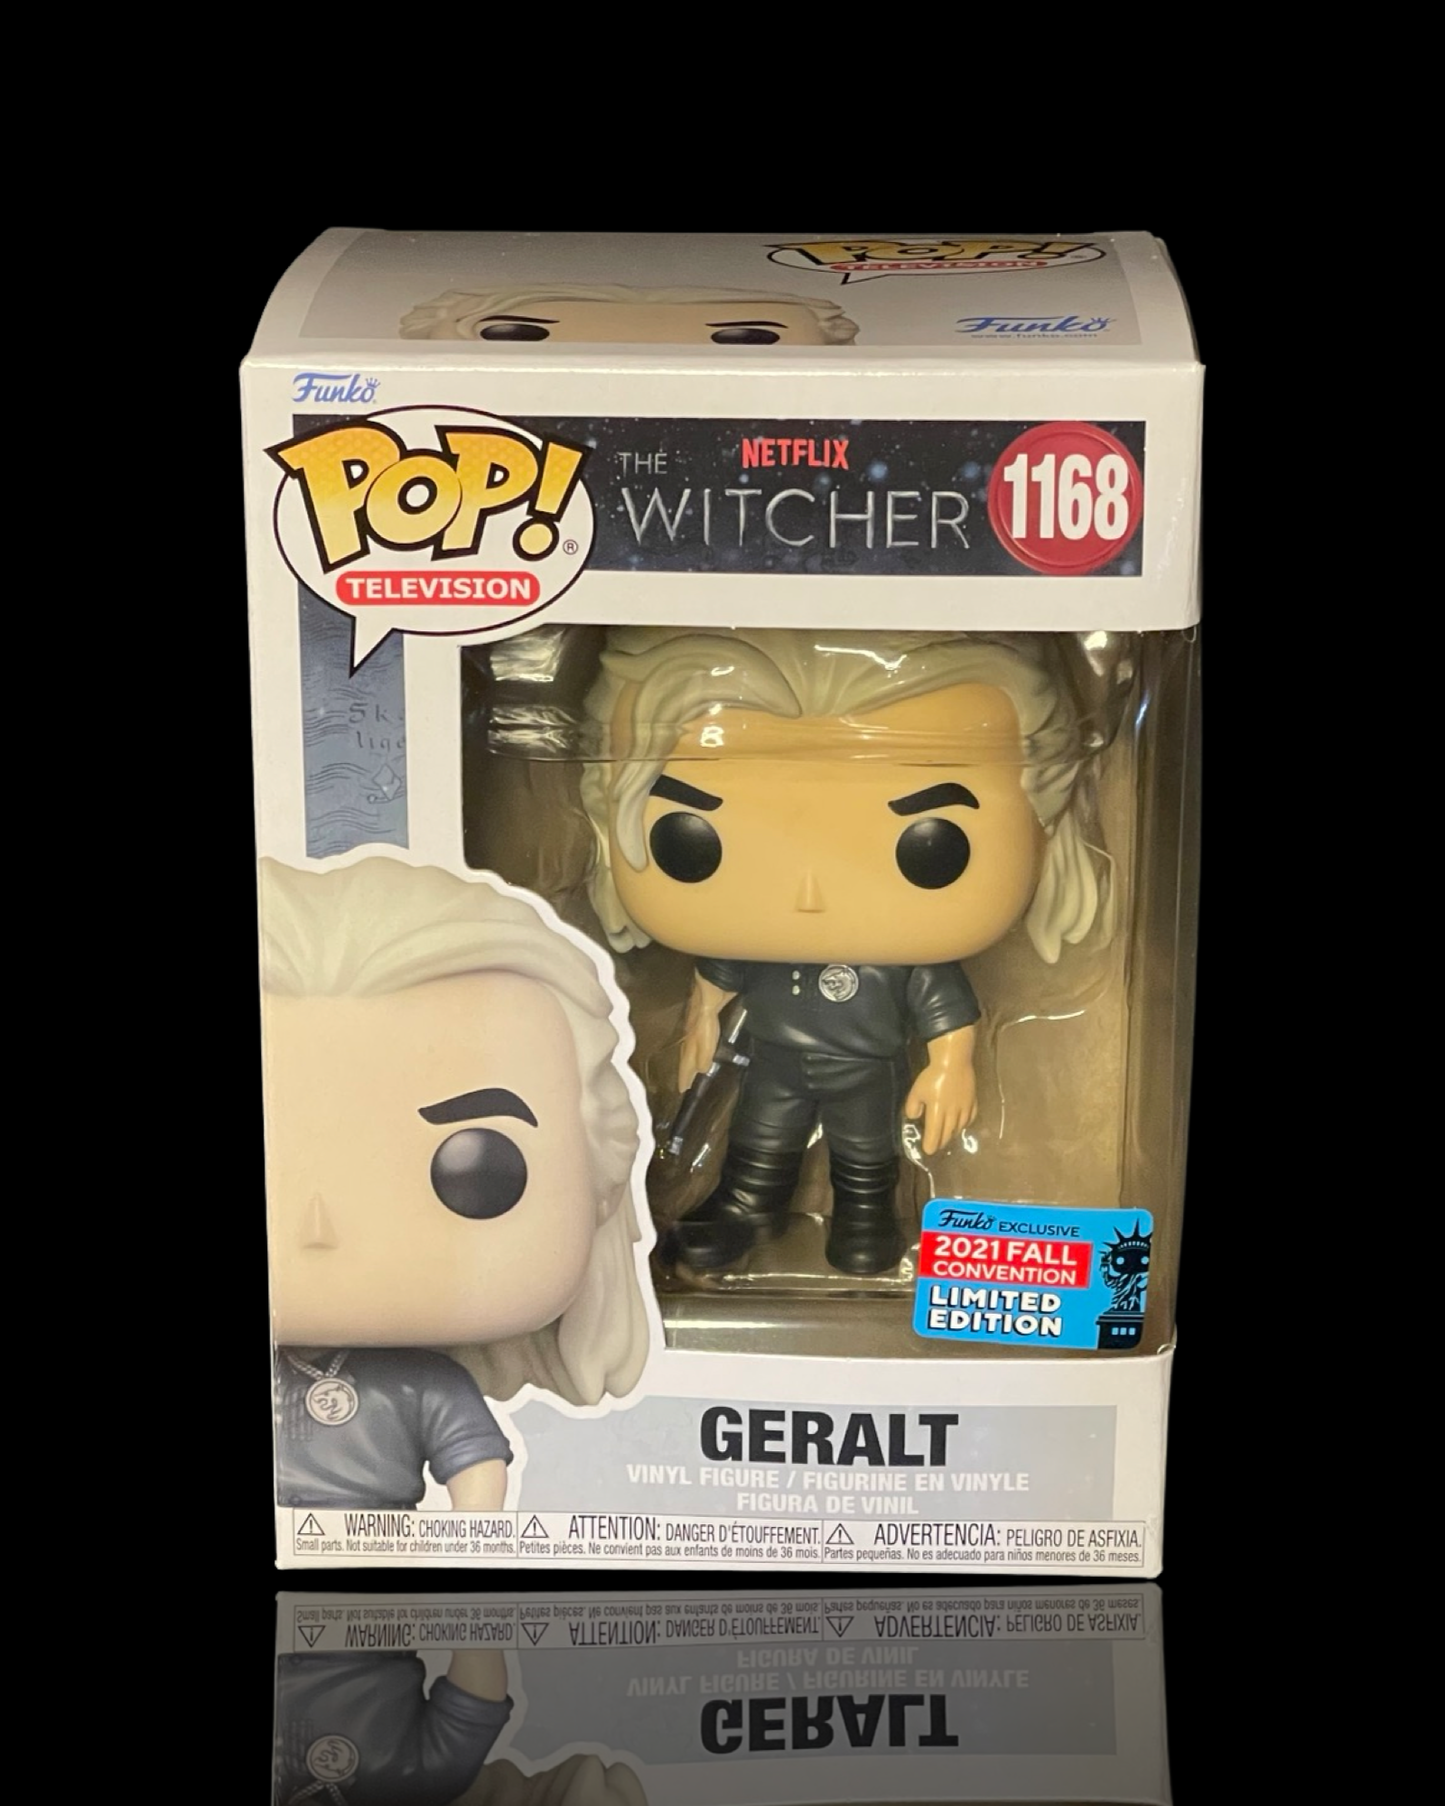 The Witcher: Geralt 2021 Fall Convention Exclusive